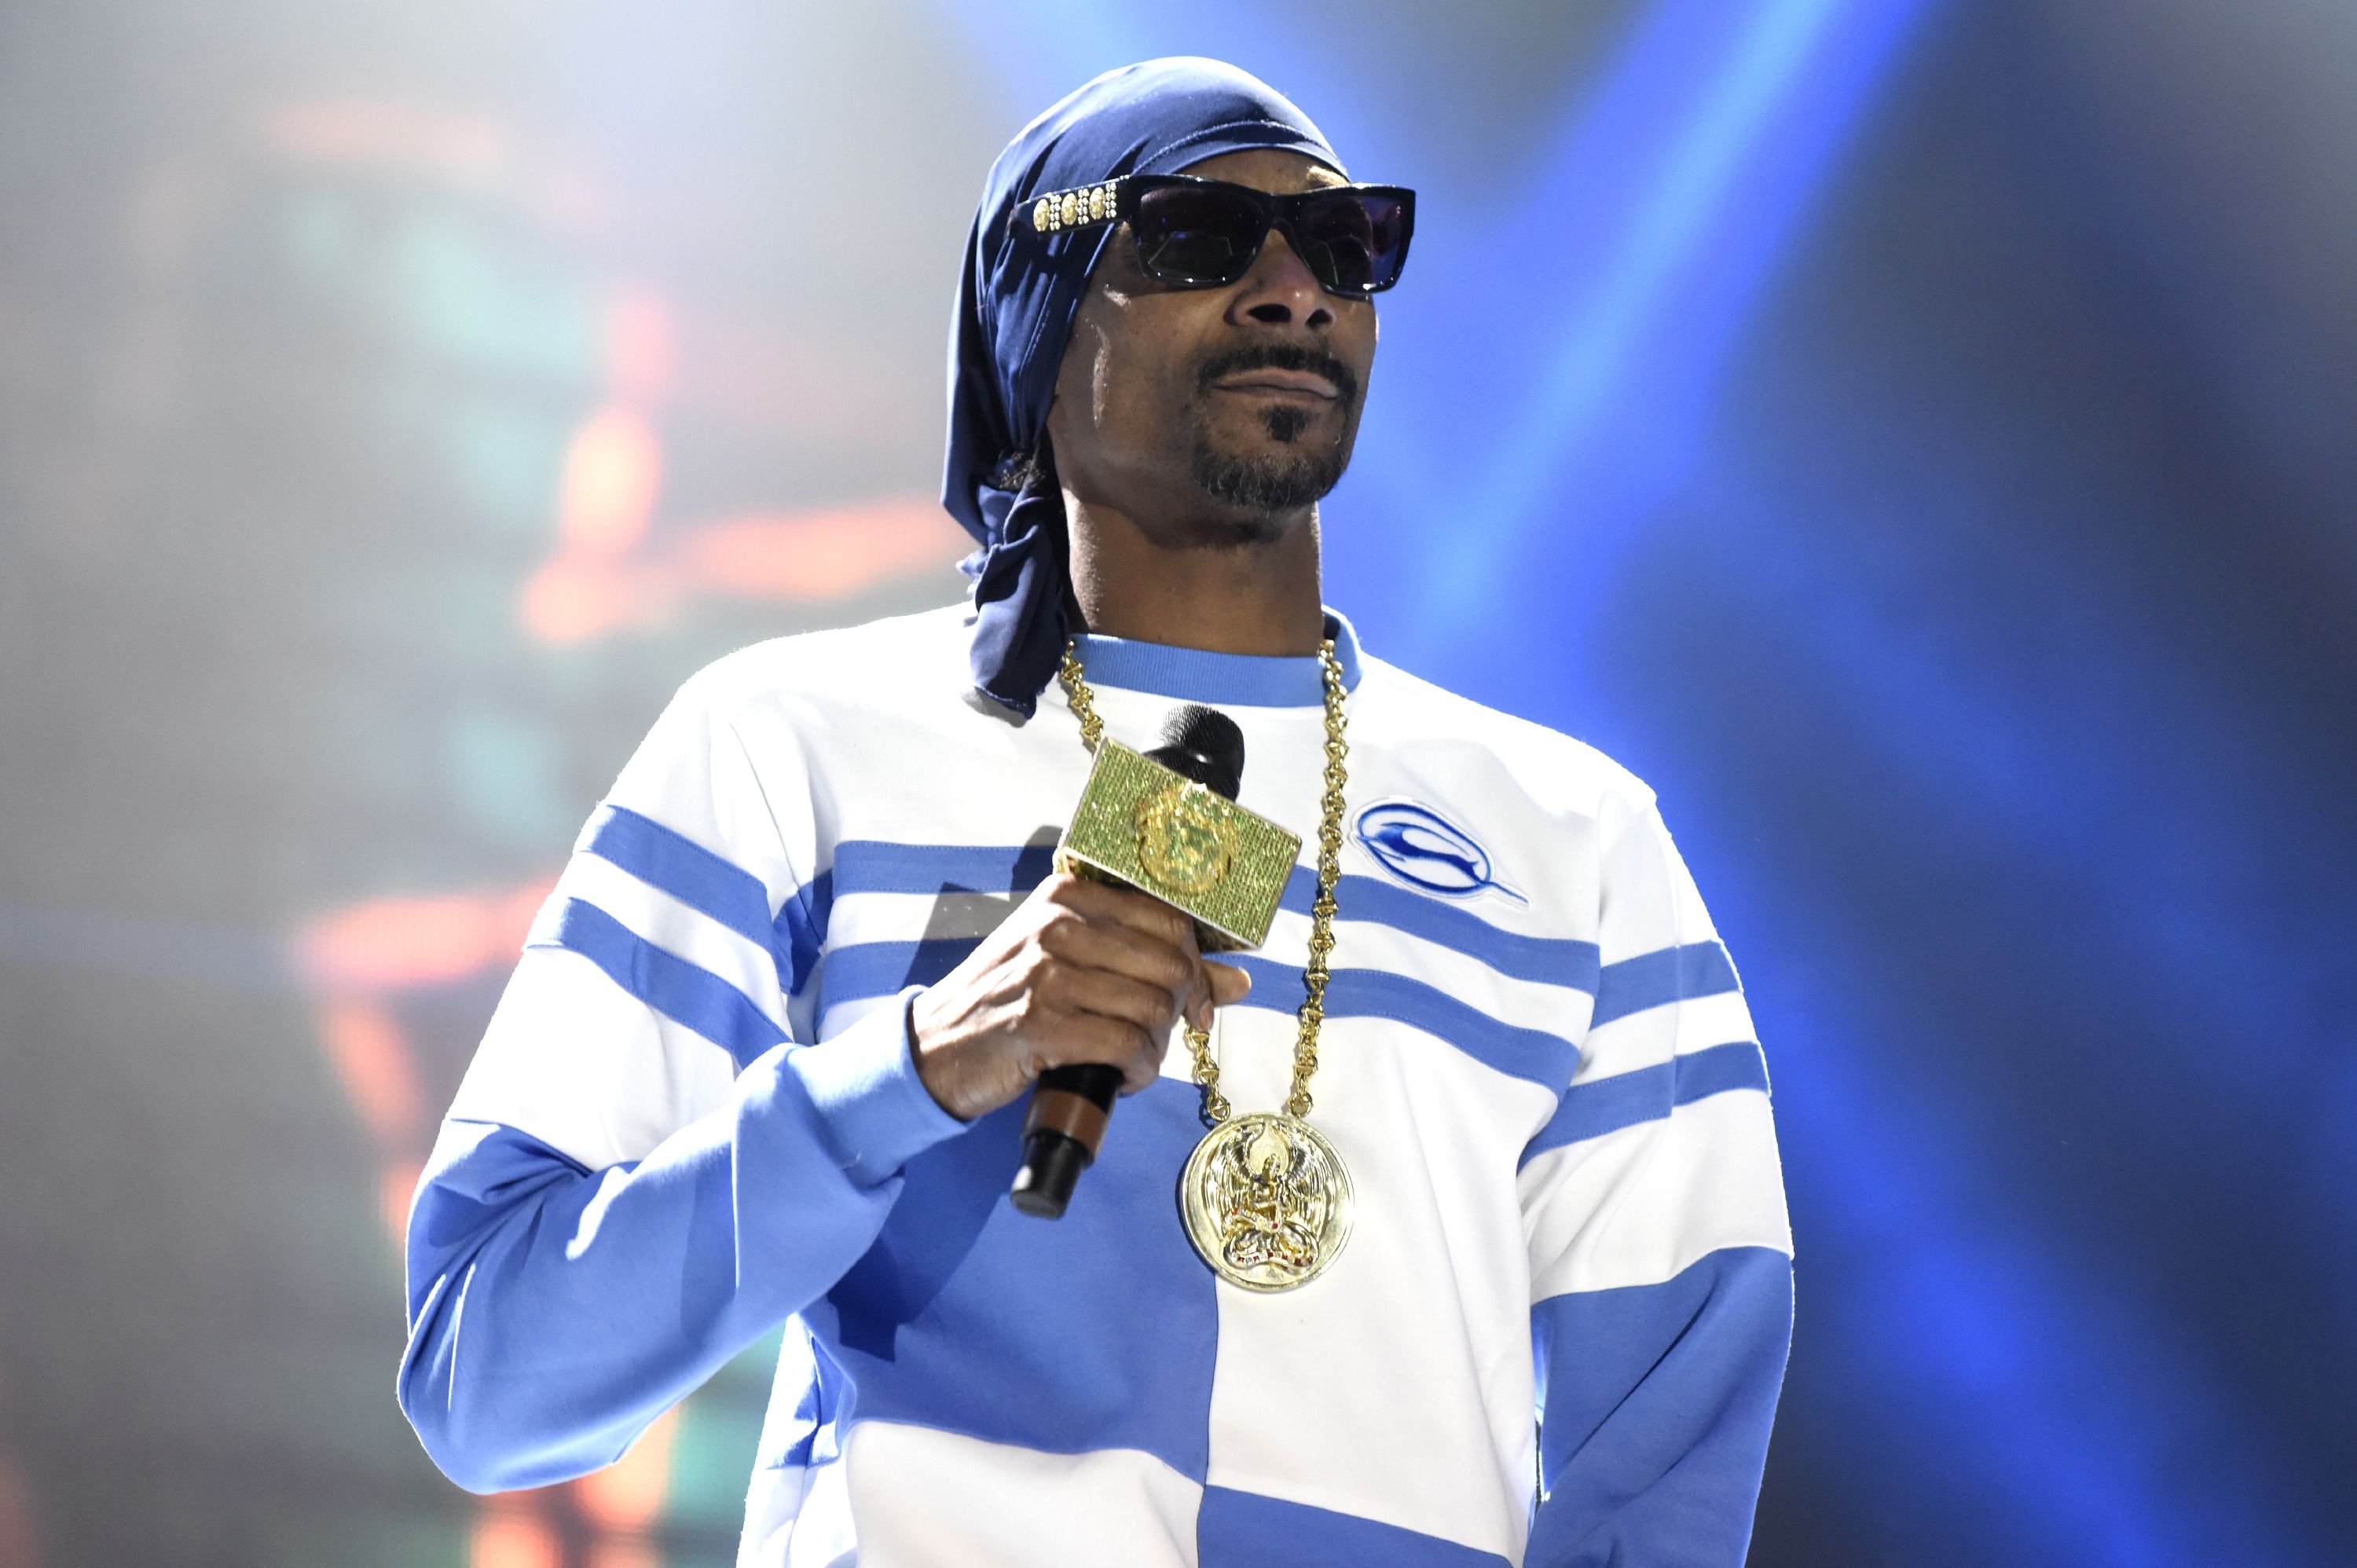 Snoop Dogg at the PowWow Jam at the 2018 Okeechobee Music Festival at Sunshine Grove on March 3, 2018 | Photo: Getty Images